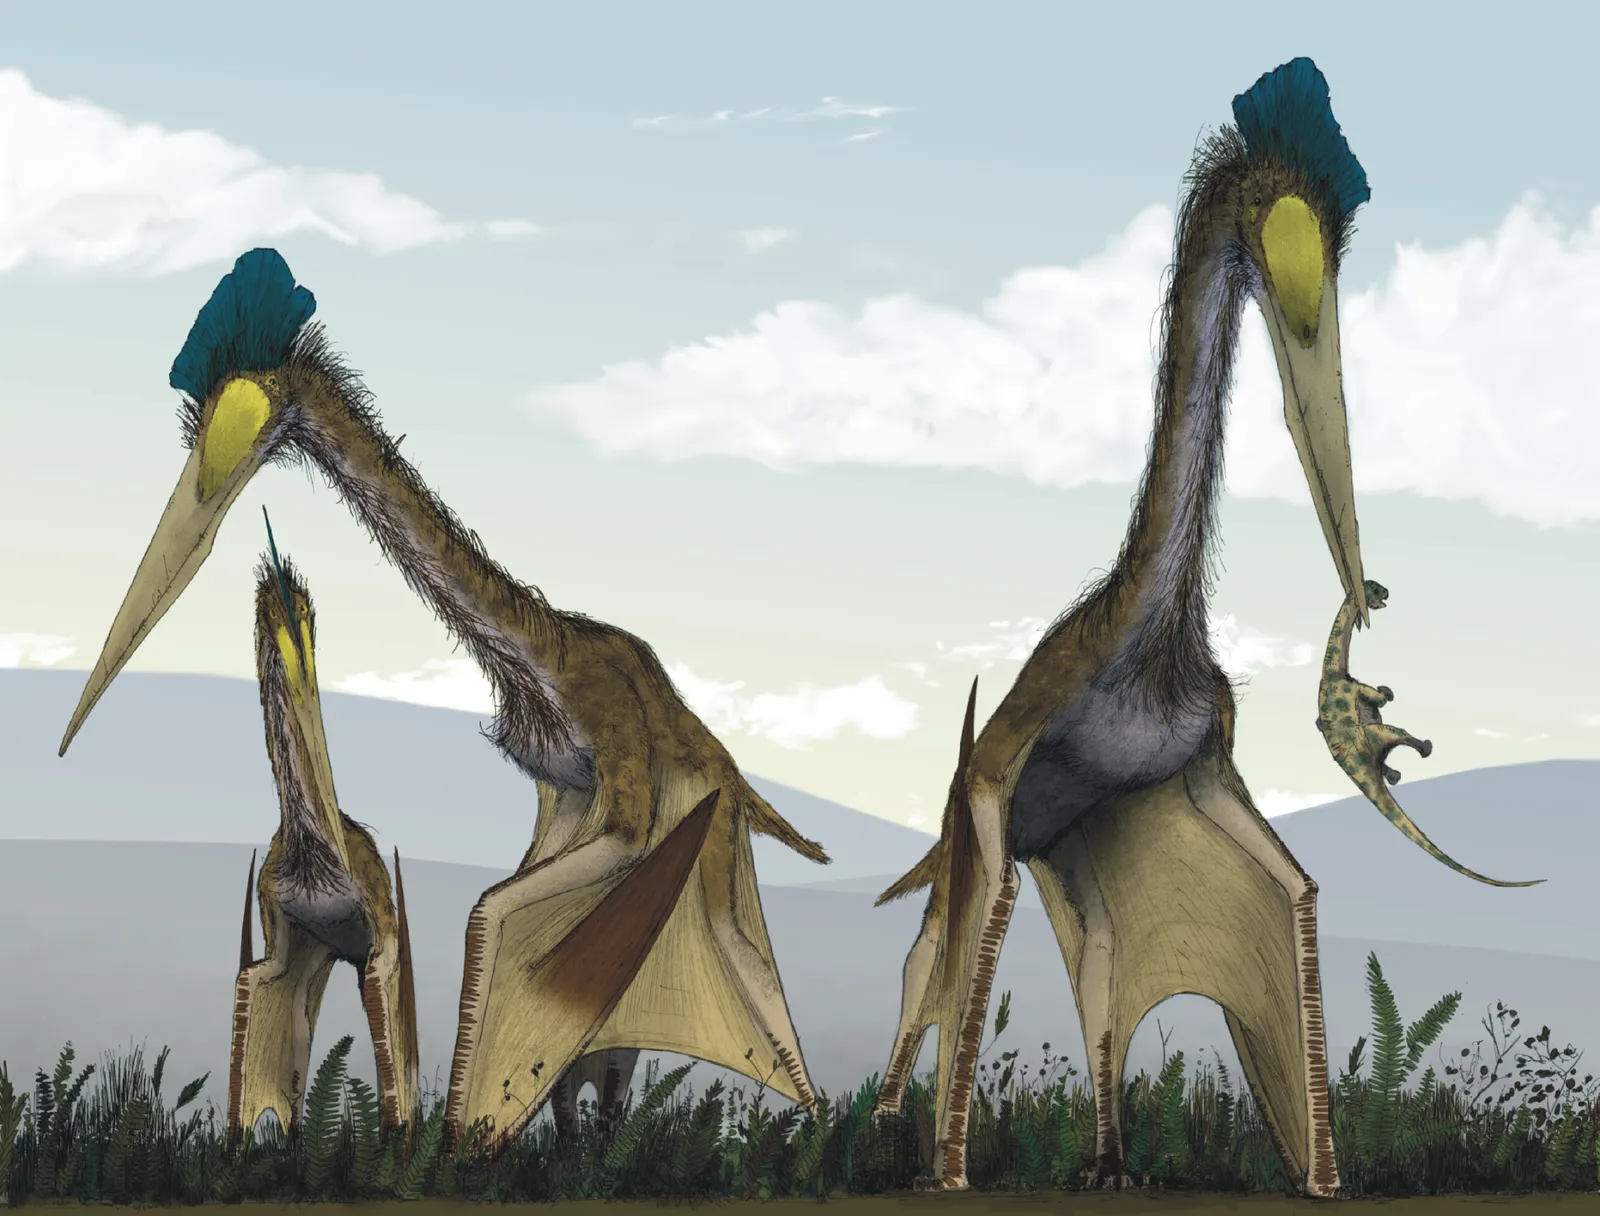 Let's learn about pterosaurs